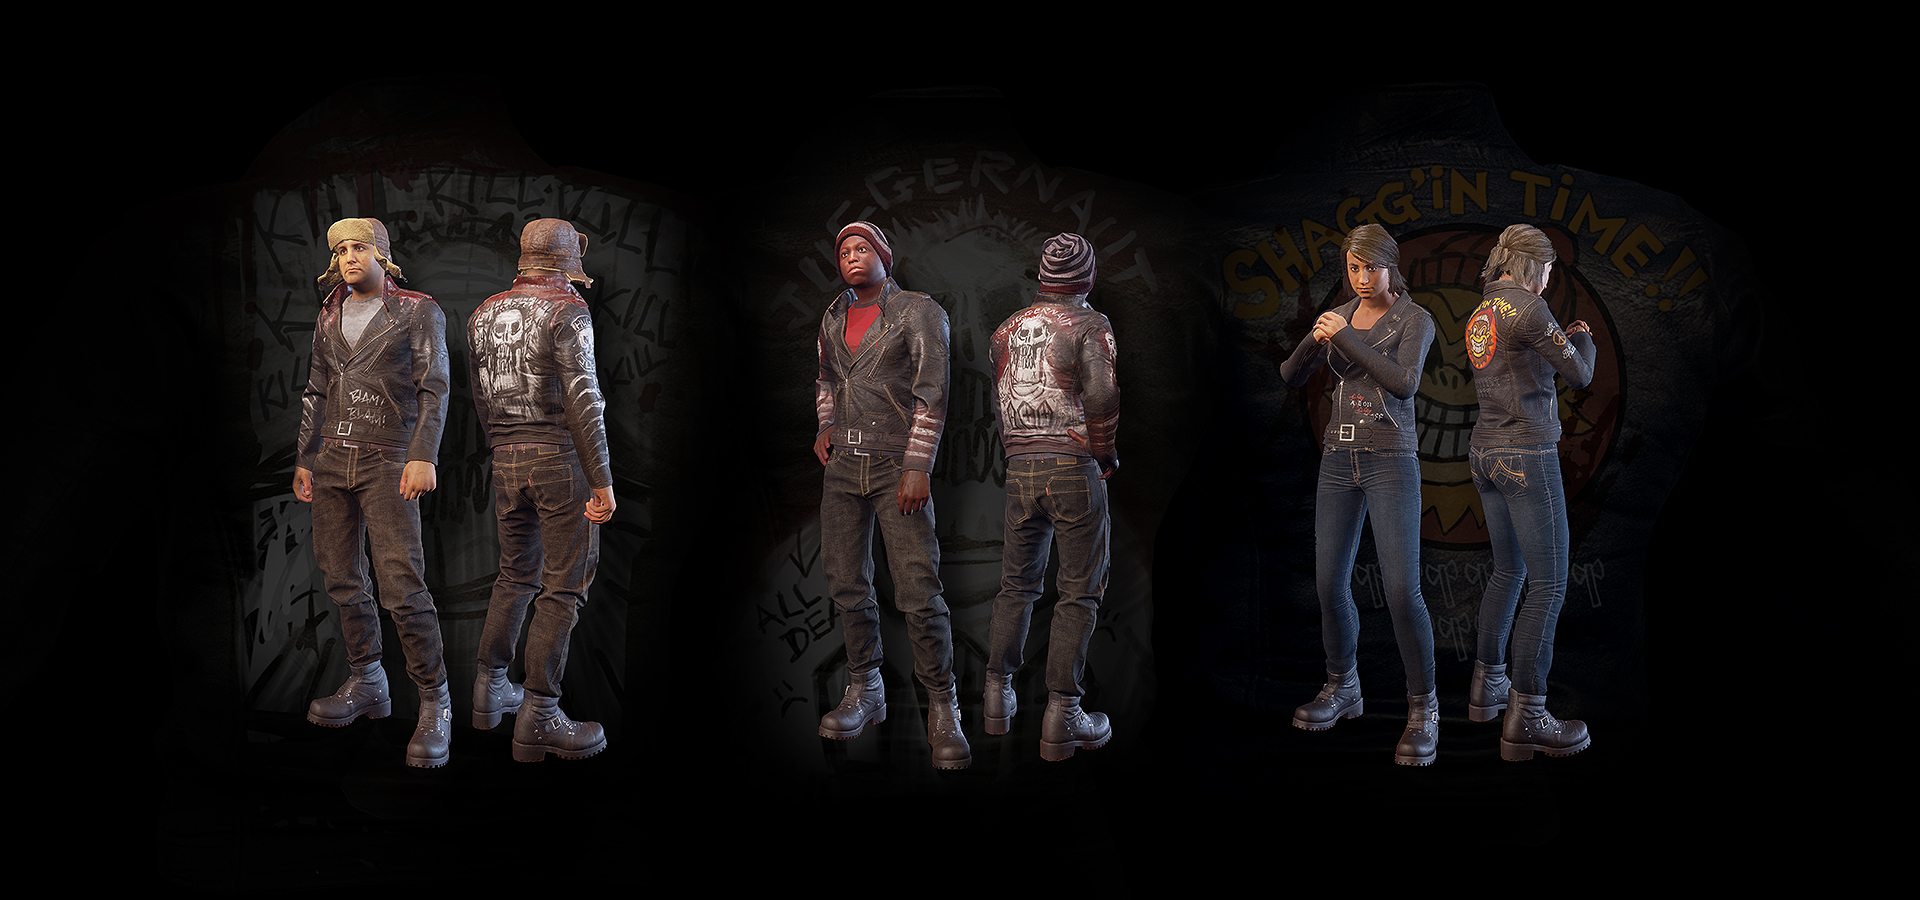 Gifts For Owners - State of Decay